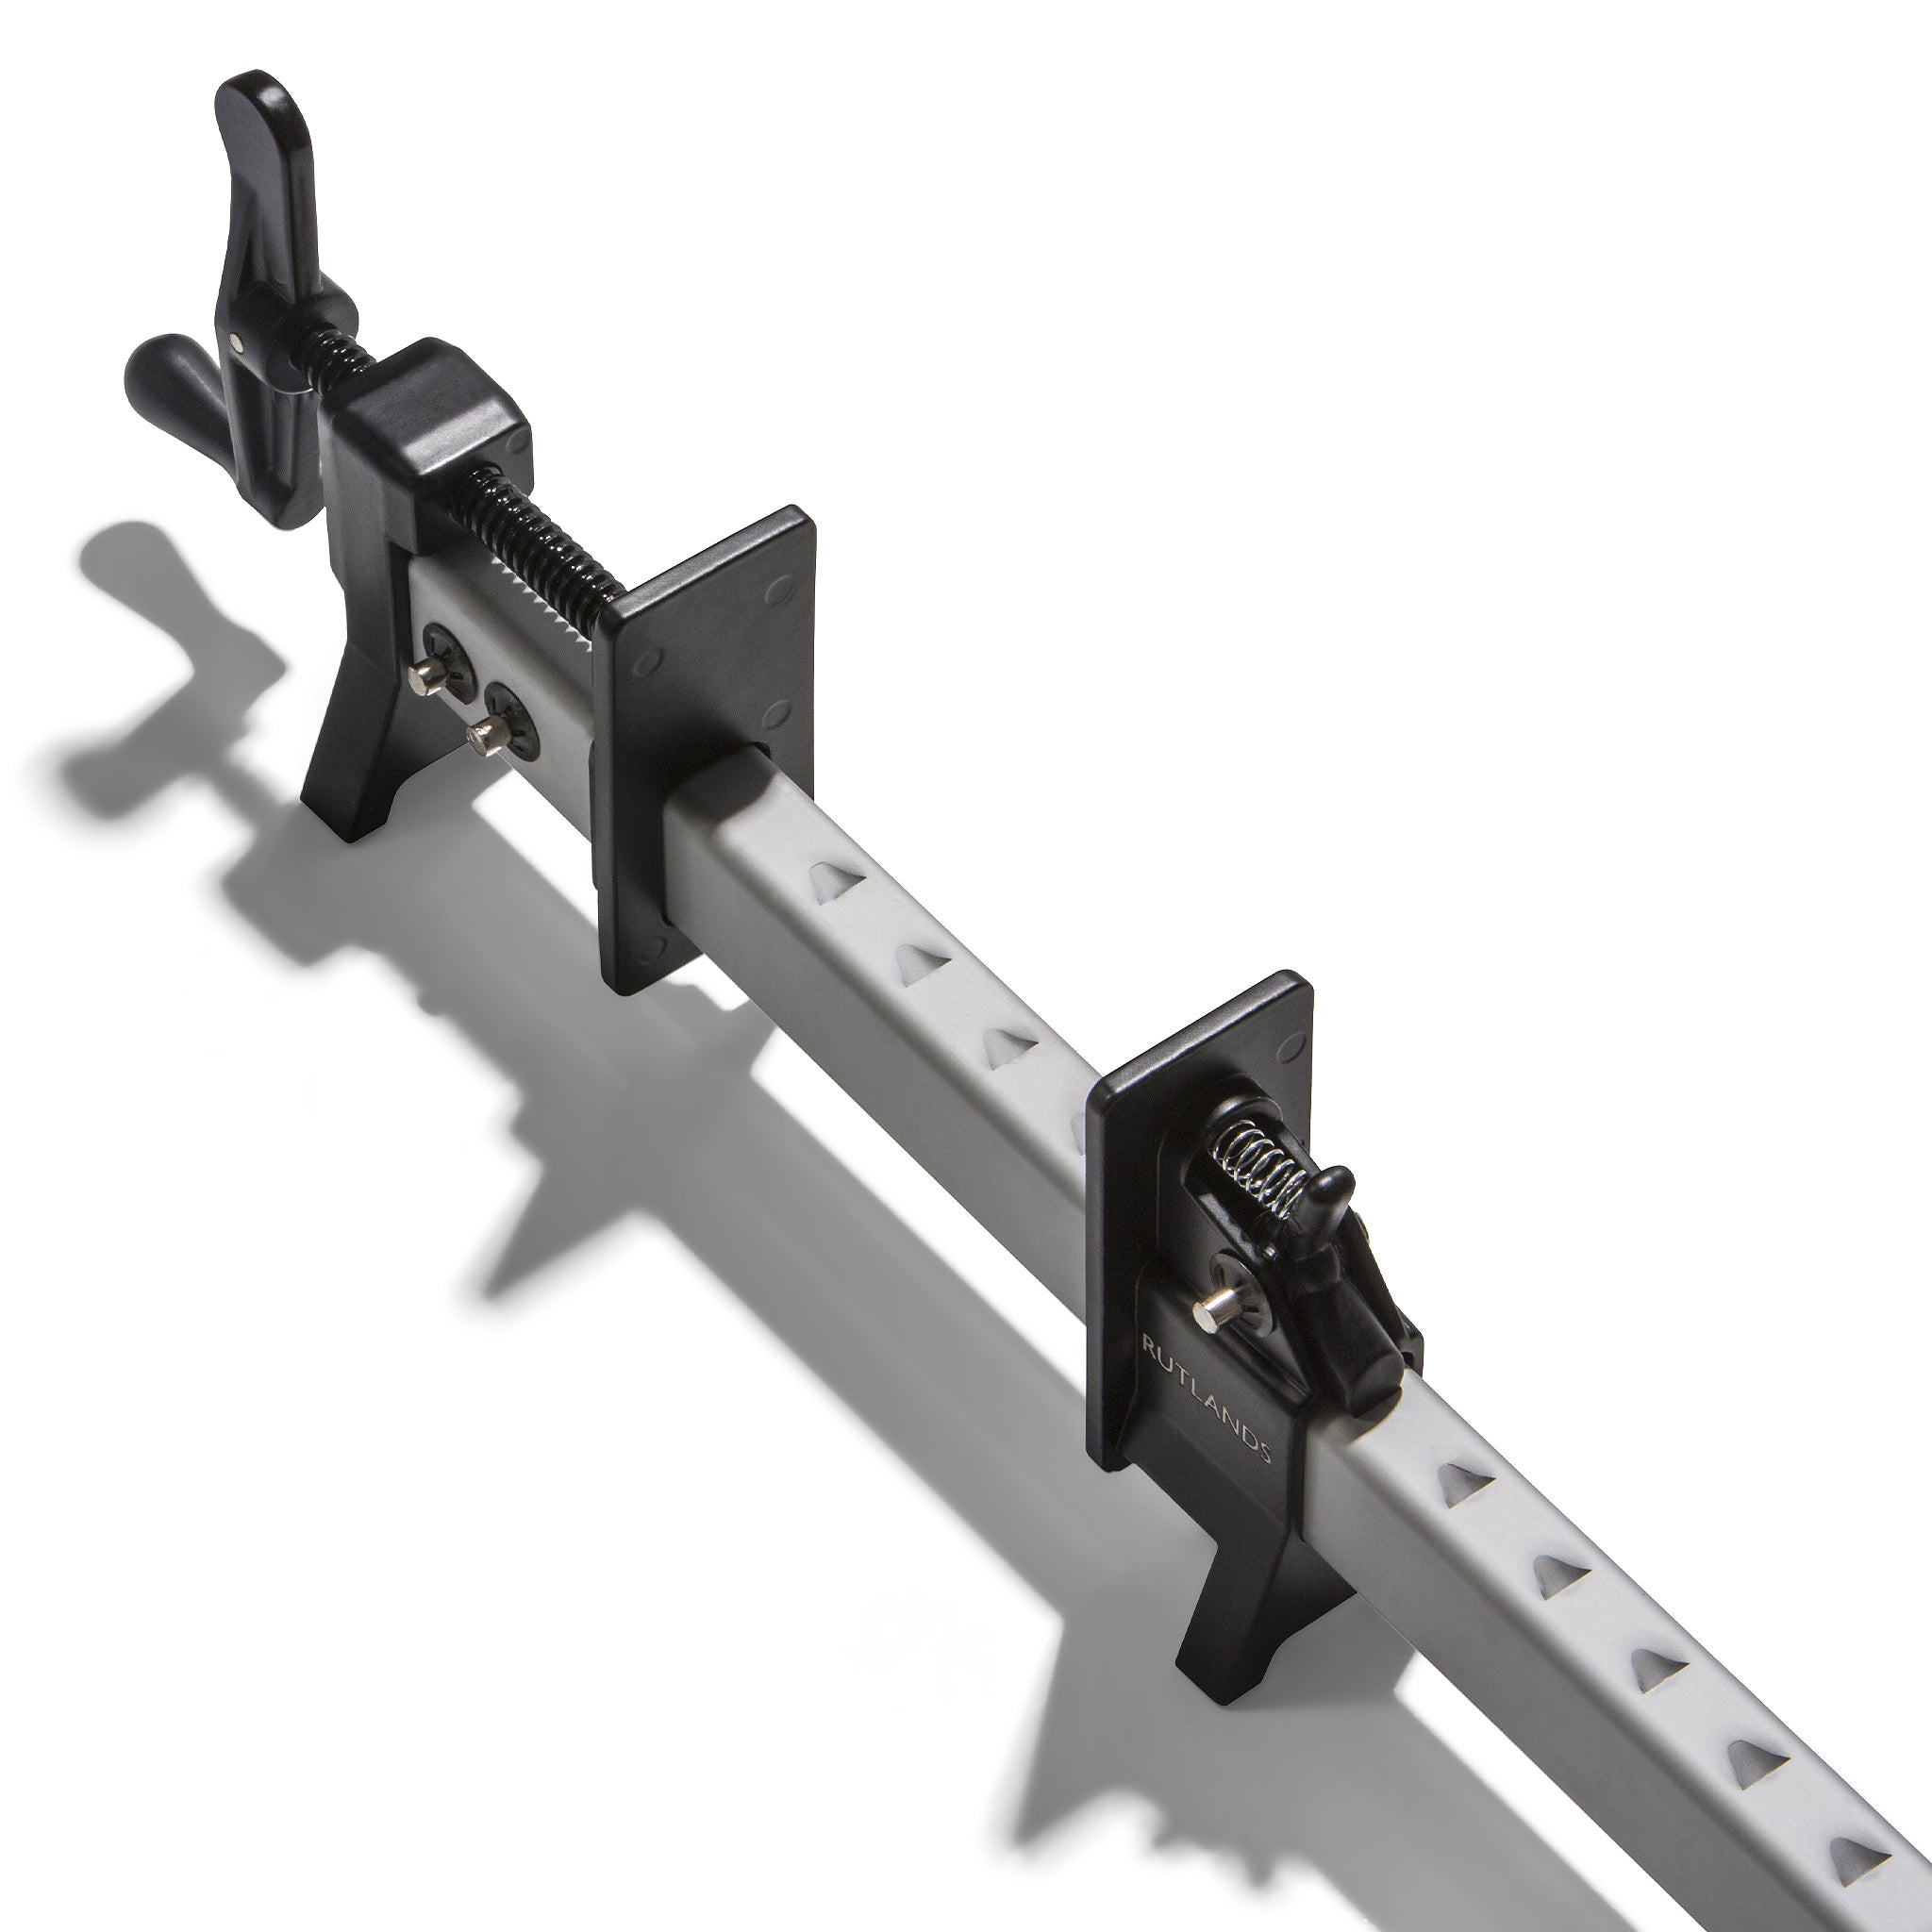 Aluminium Sash Clamps with Feet - 900mm - Pack of 4